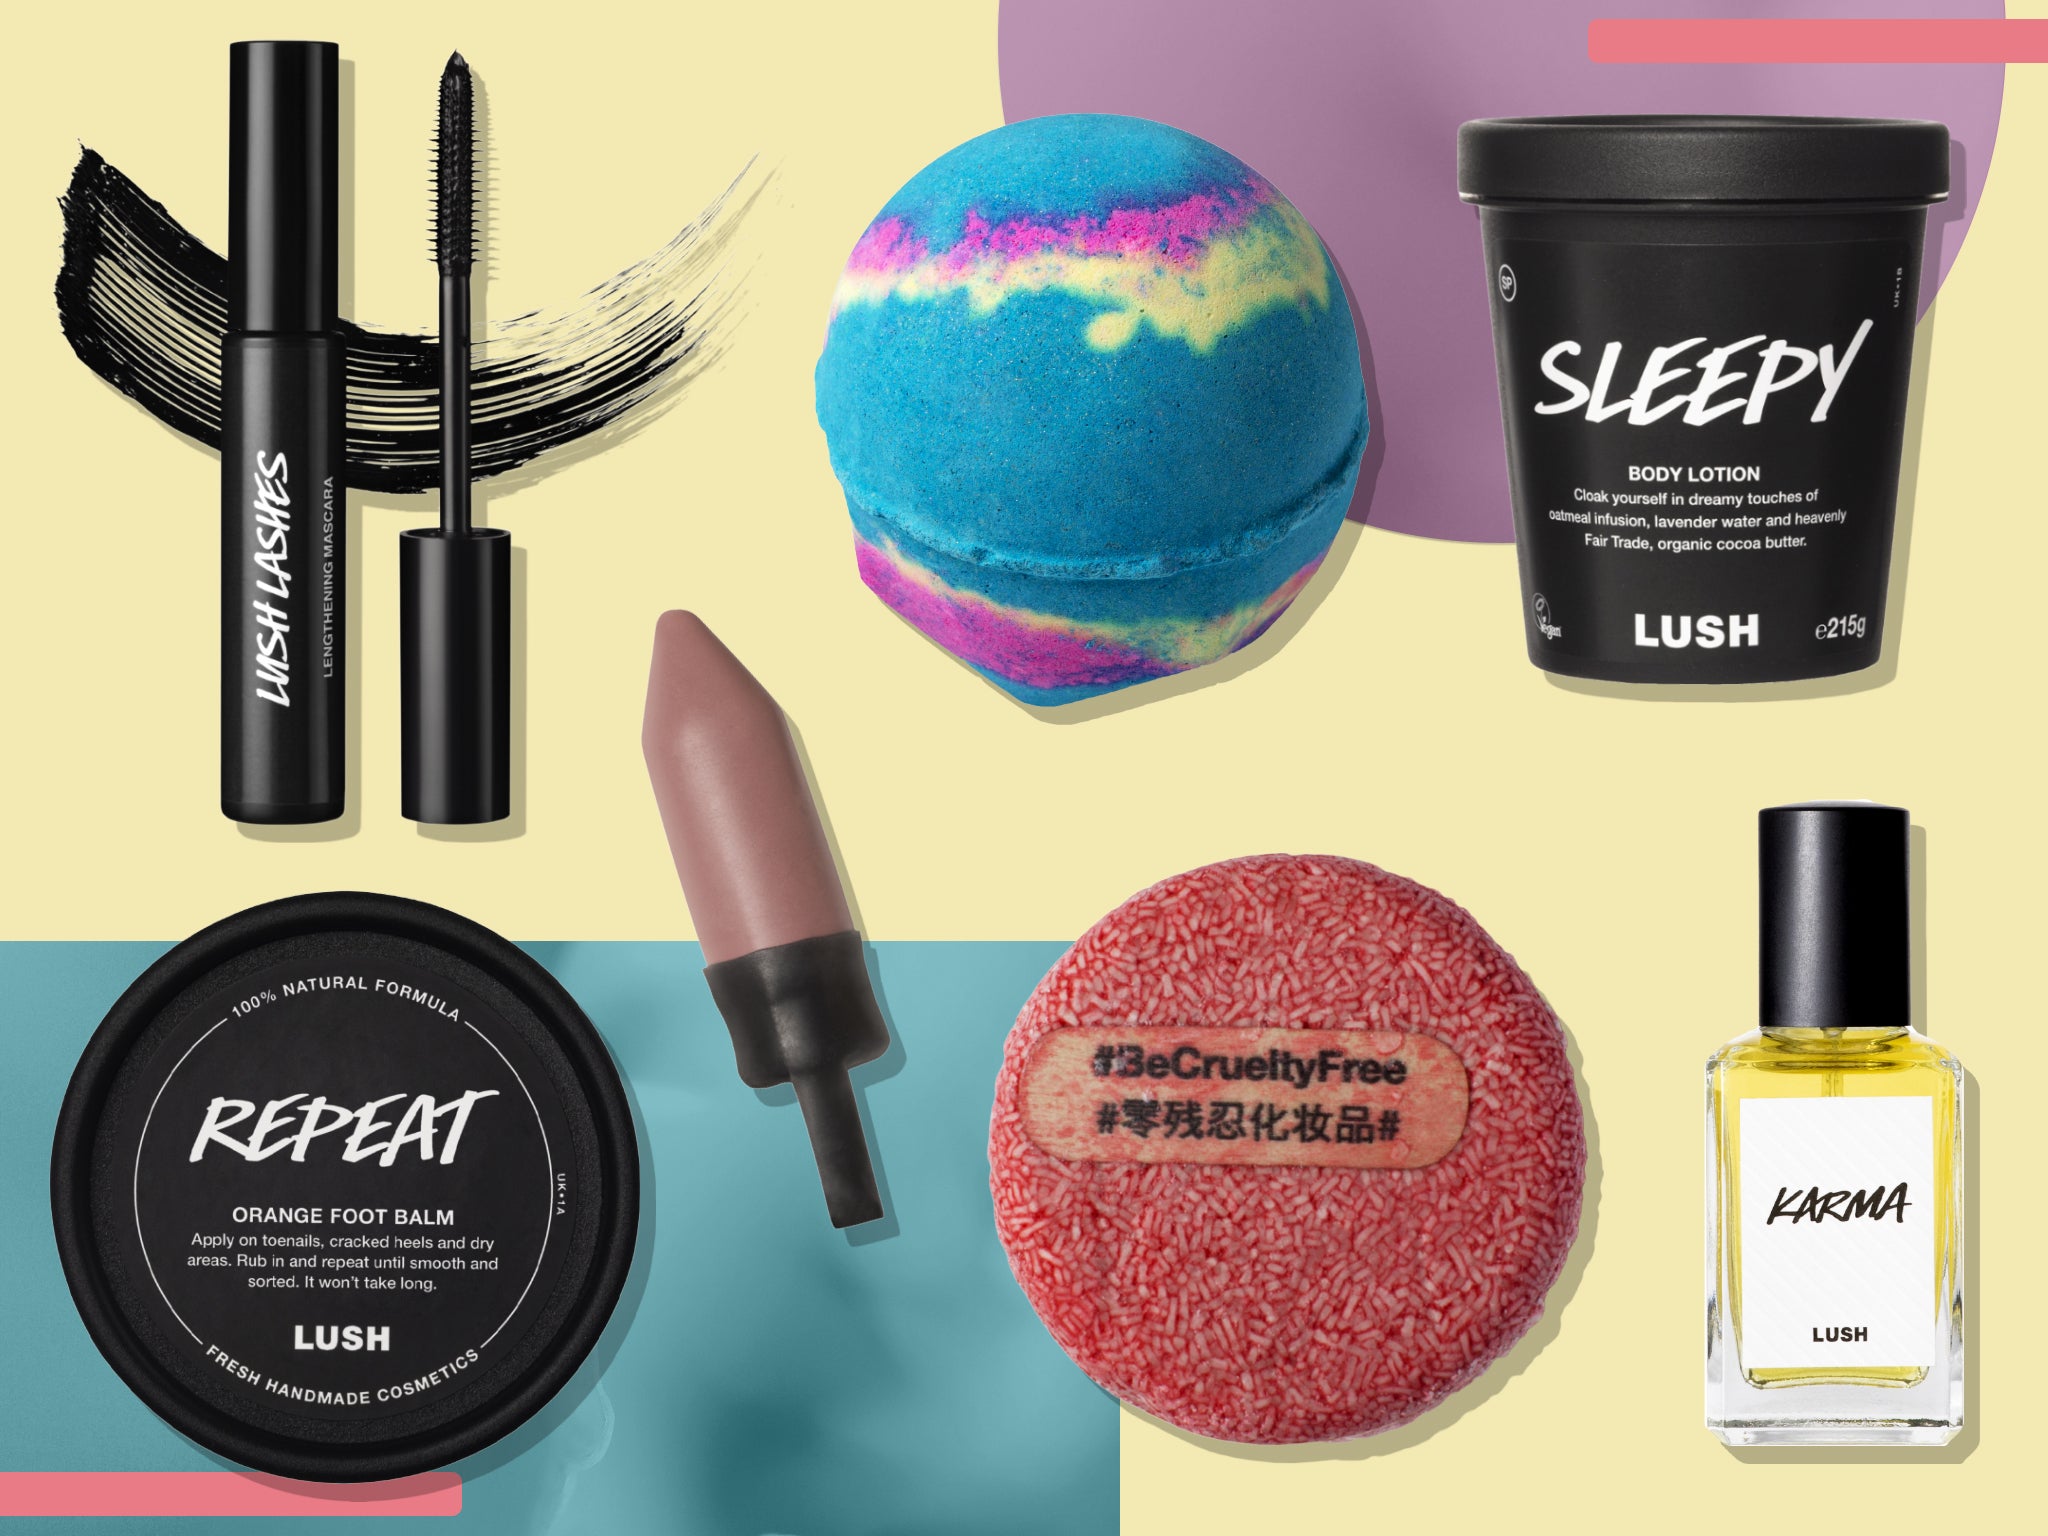 Big on sustainability, many Lush products are free of packaging